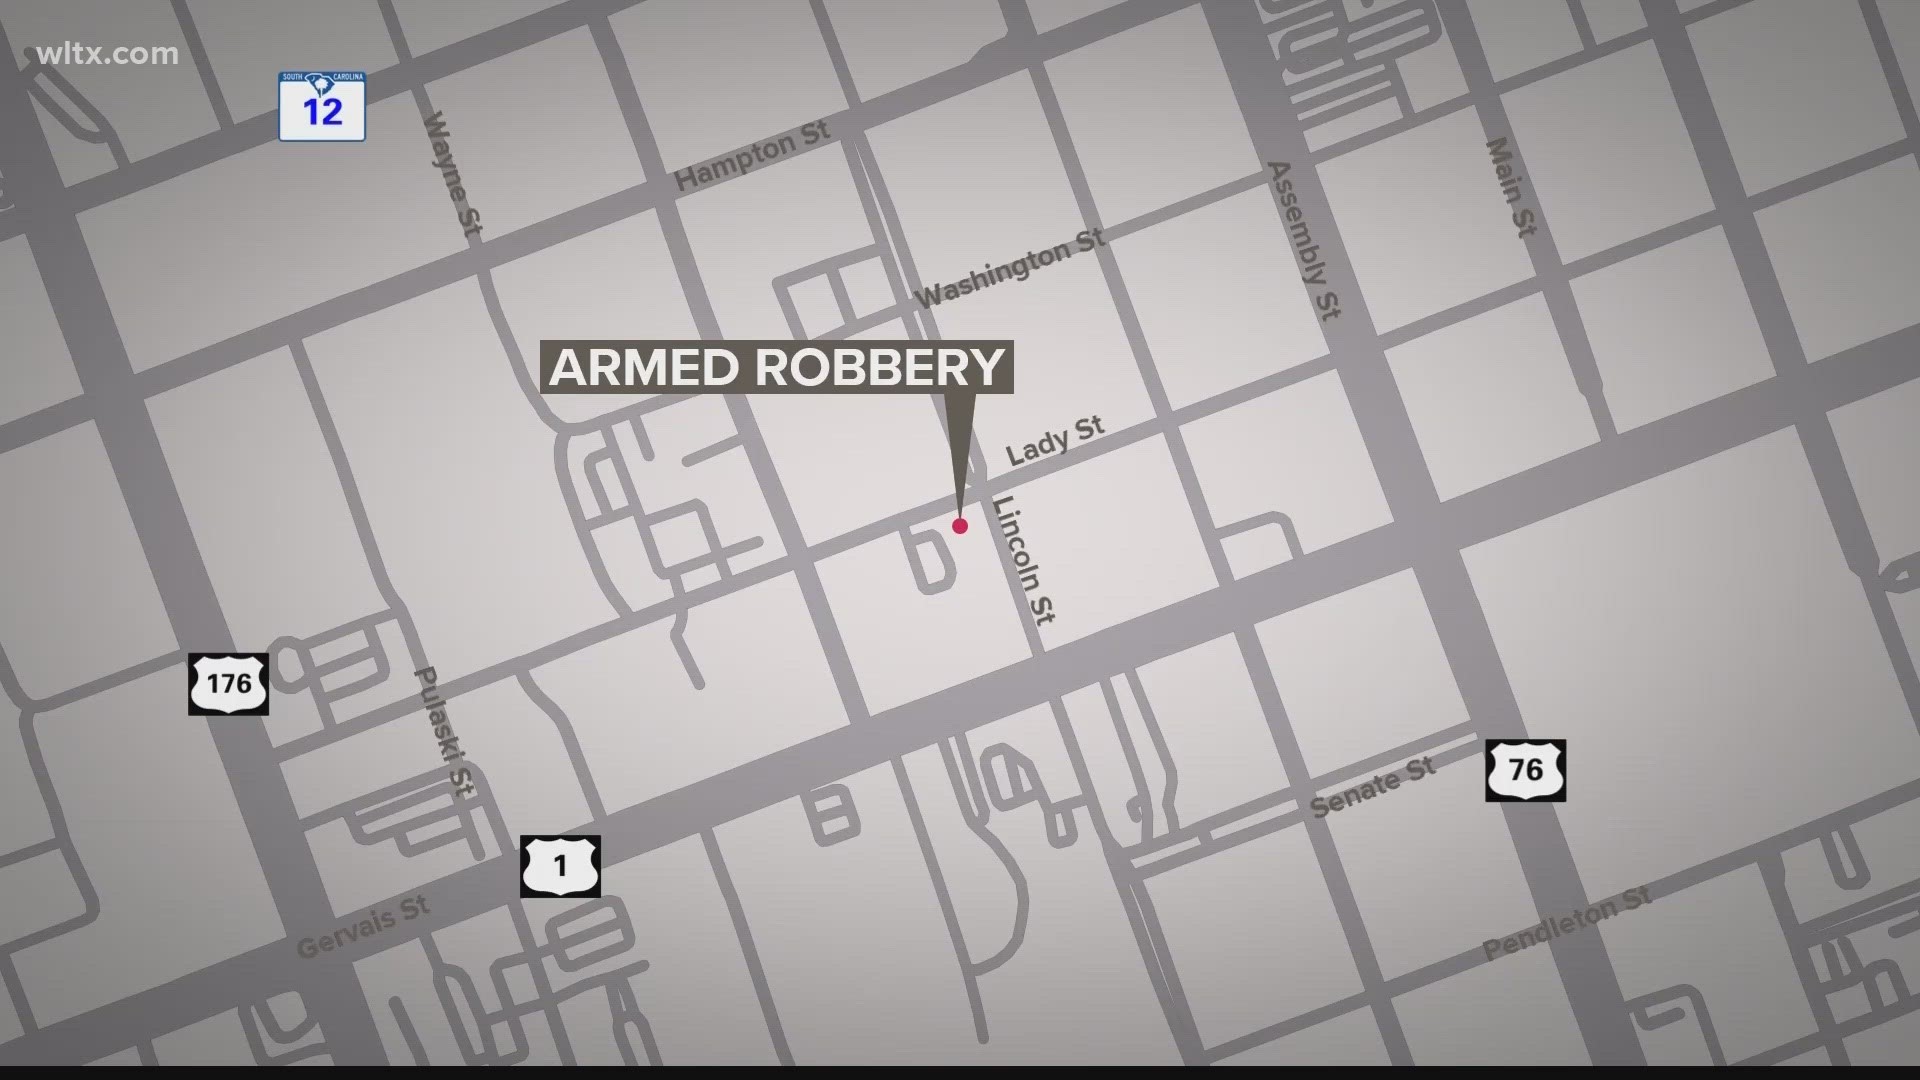 Police say the armed robbery occurred at Sandler's Jewelers on Lincoln Street around 2:30 p.m.